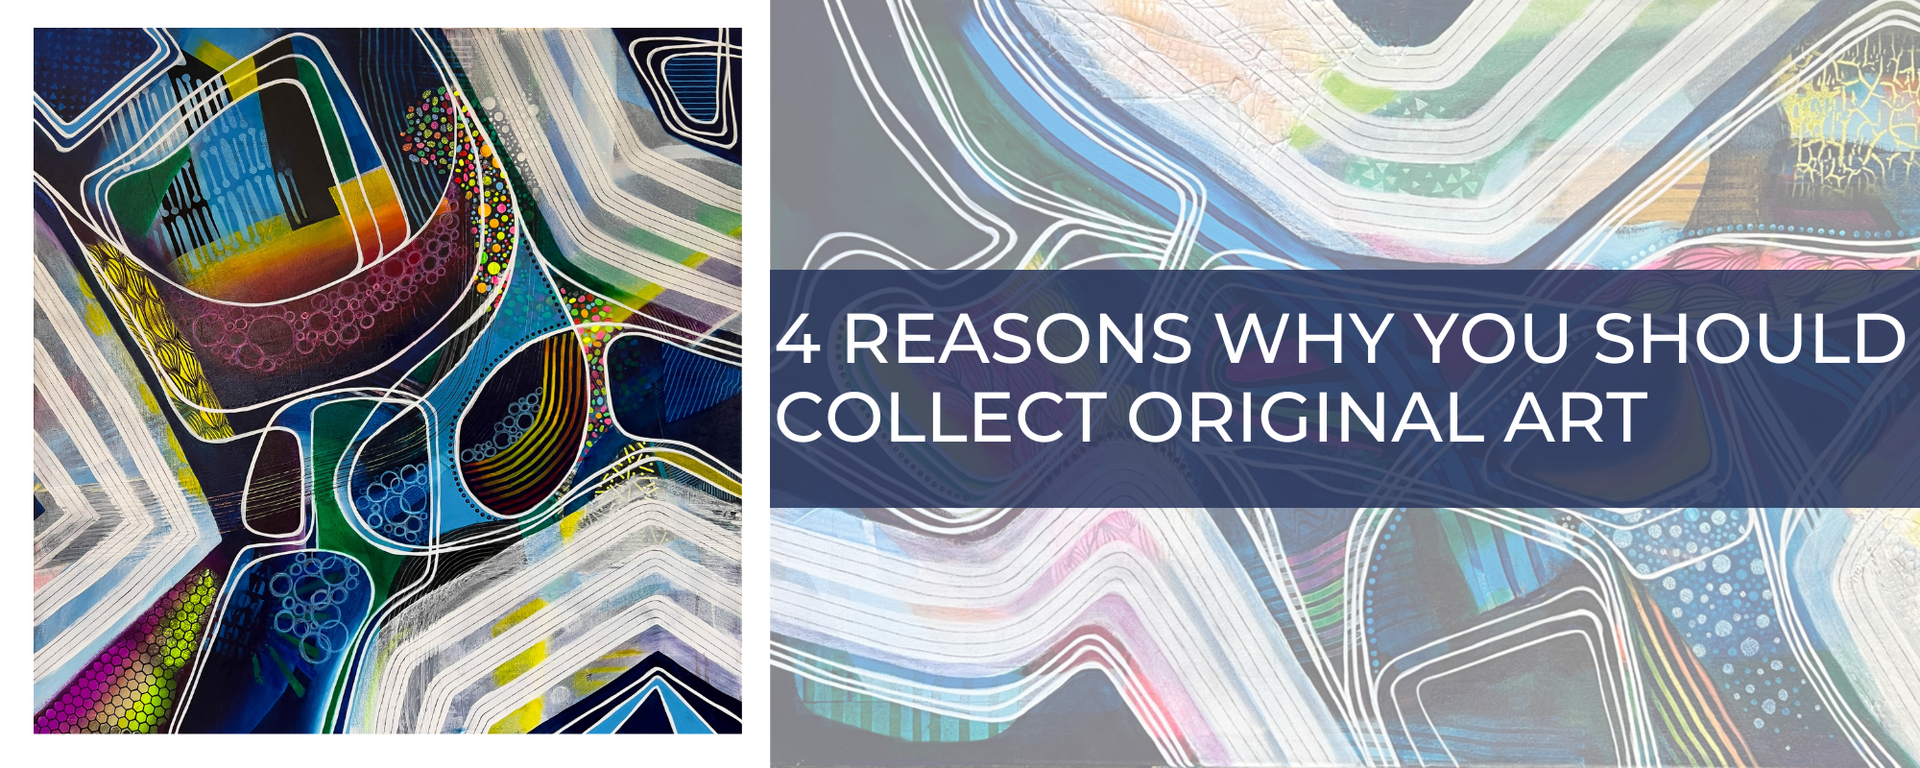 4 Reasons Why You Should Collect Original Art